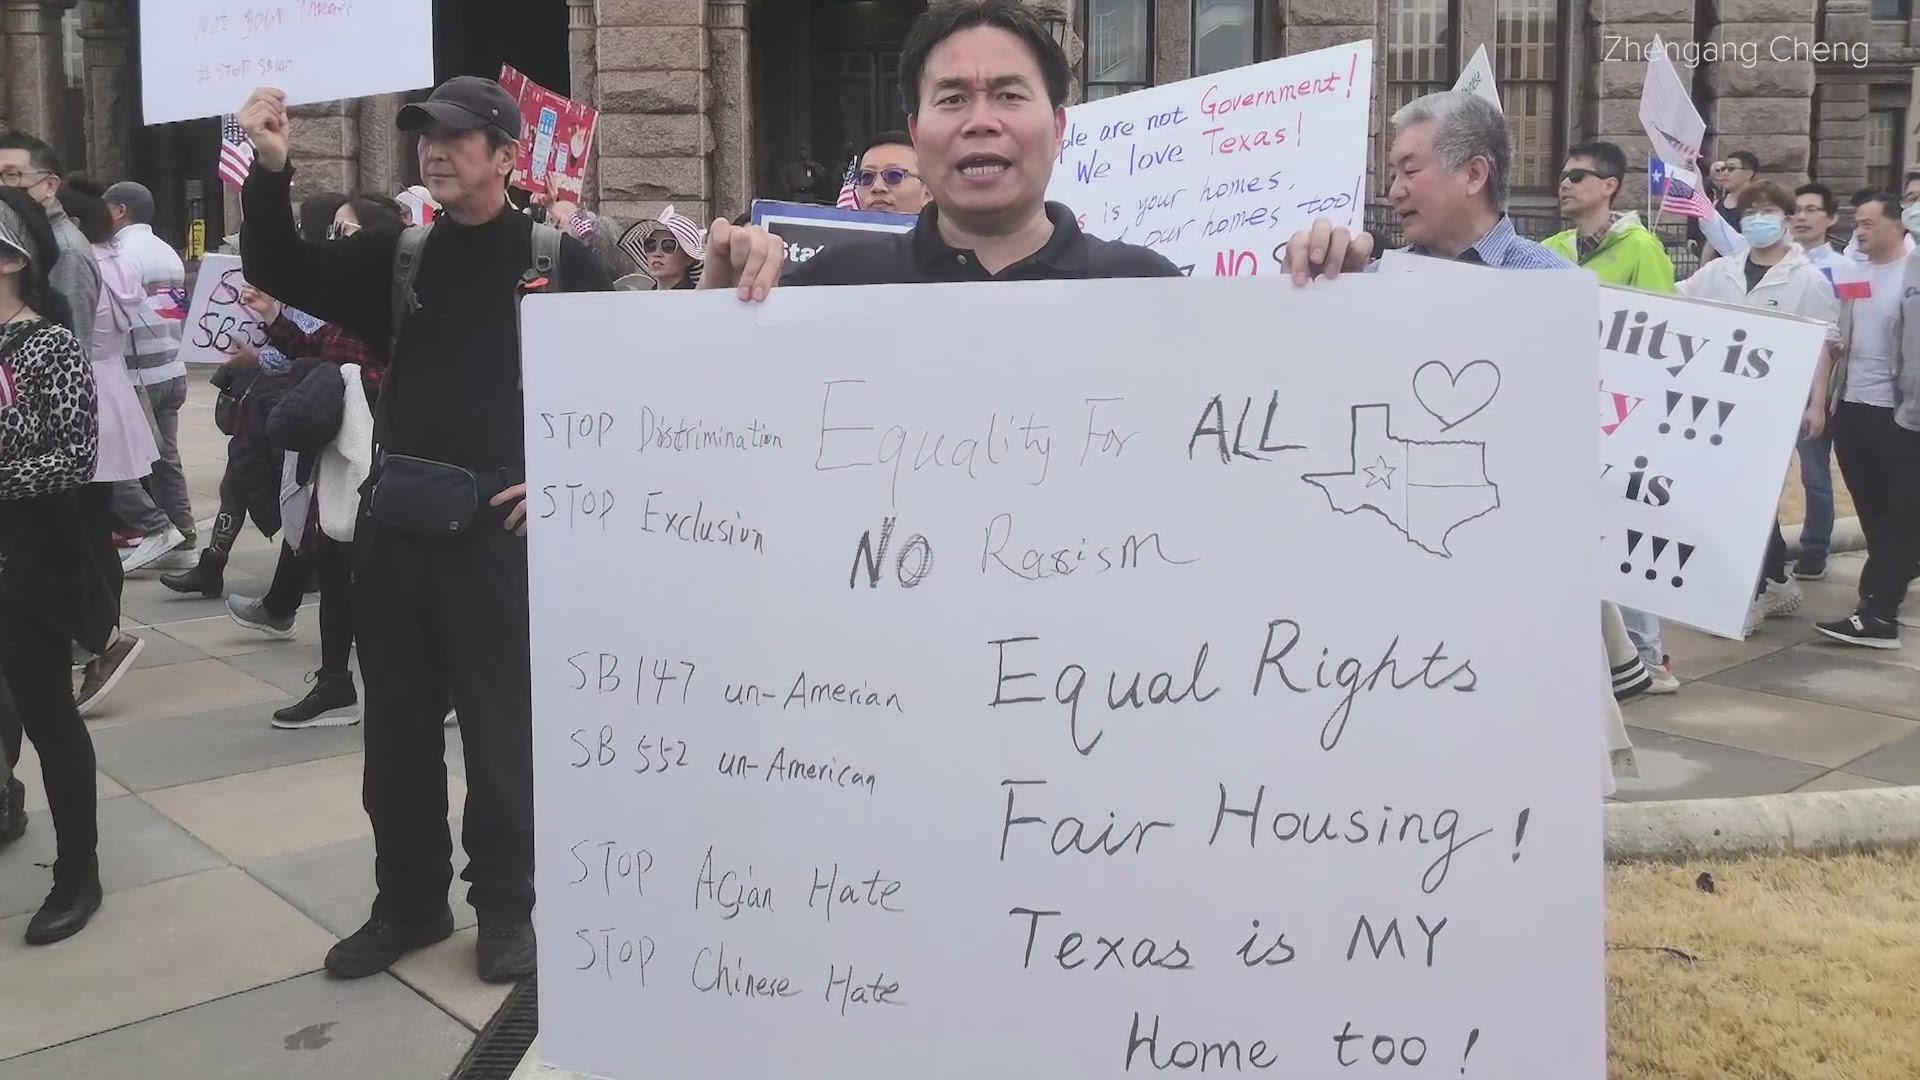 Several bills introduced during this year's legislative session alarmed Asian communities across Texas, prompting unprecedented protest.